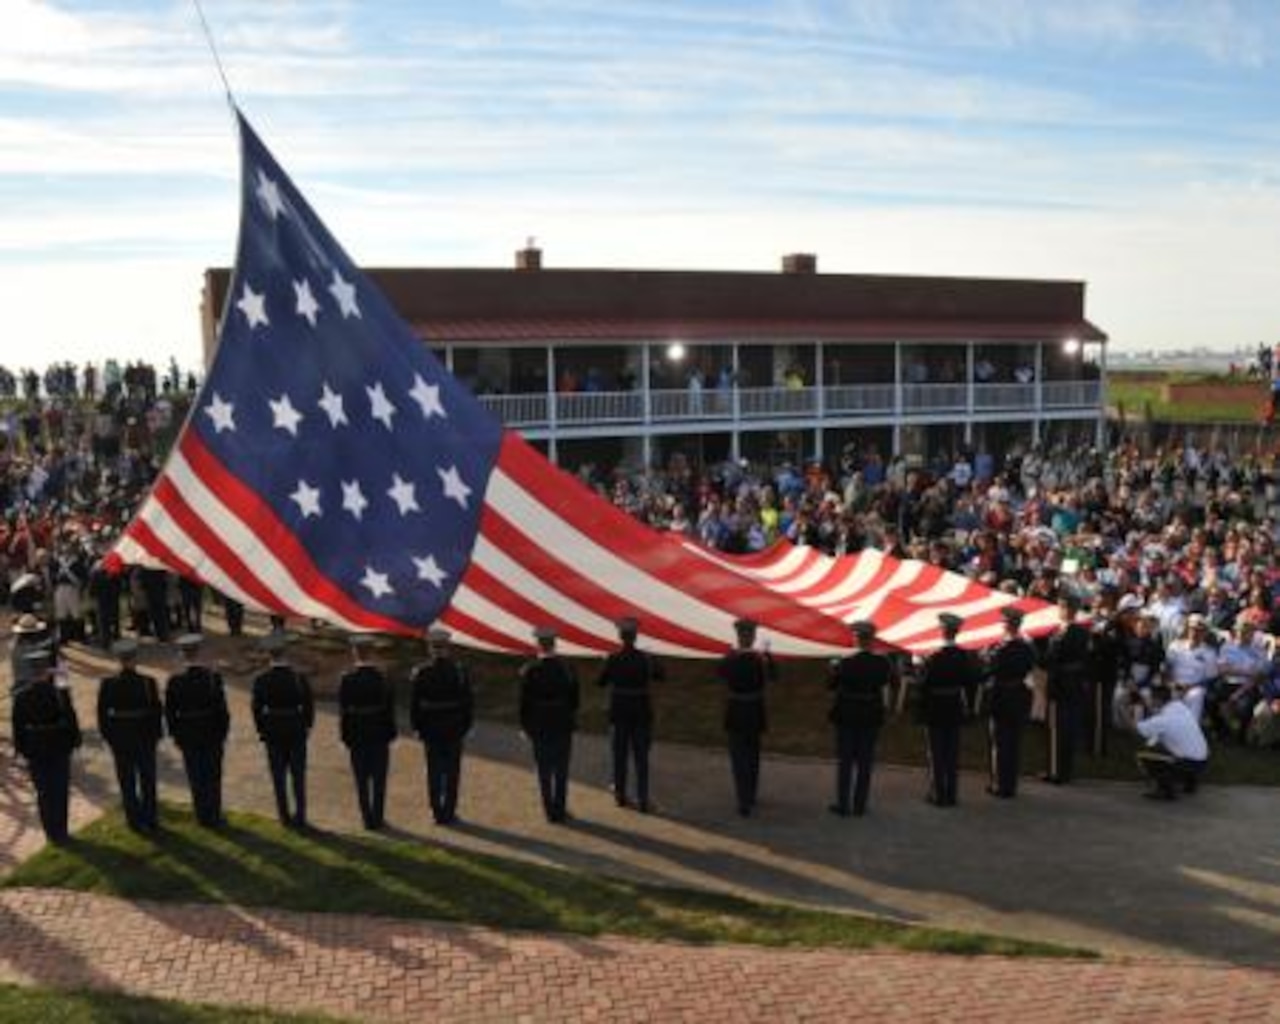 A replica of the original Star-Spangled Banner is hoisted during the Dawn’s Early Light Ceremony at Fort McHenry in Baltimore, Sept. 14, 2014. The ceremony commemorates the date and time 200 years ago that Francis Scott Key was inspired to write the words that would become the national anthem. U.S. Coast Guard photo by Petty Officer 1st Class Pamela J. Boehland